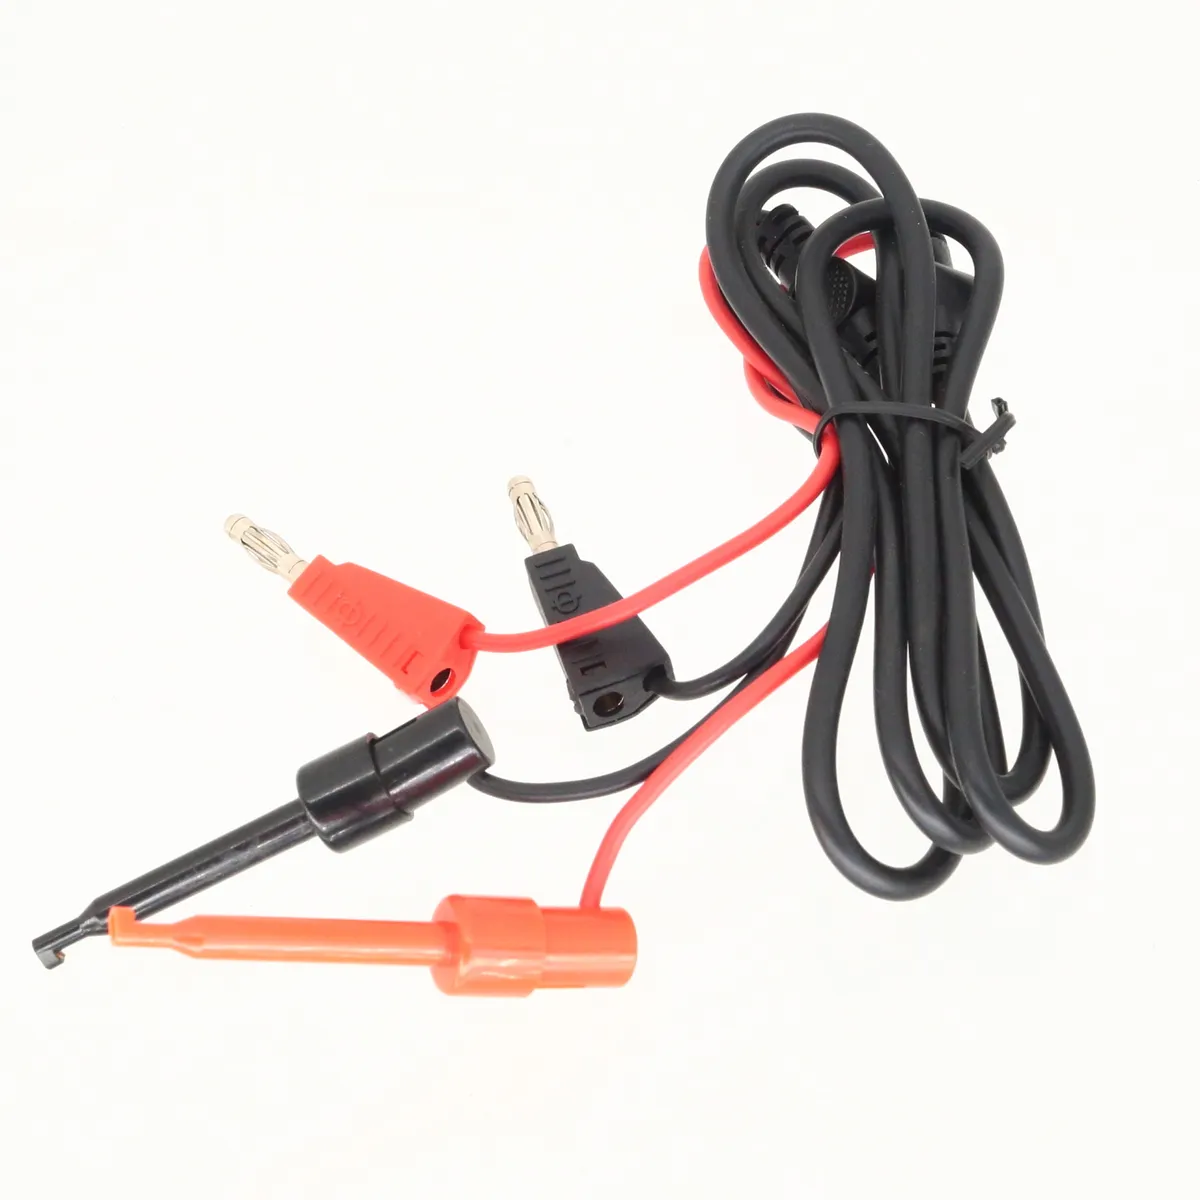 Cable double banana plug jack to Test Hook Oscilloscope test probe wire 6A